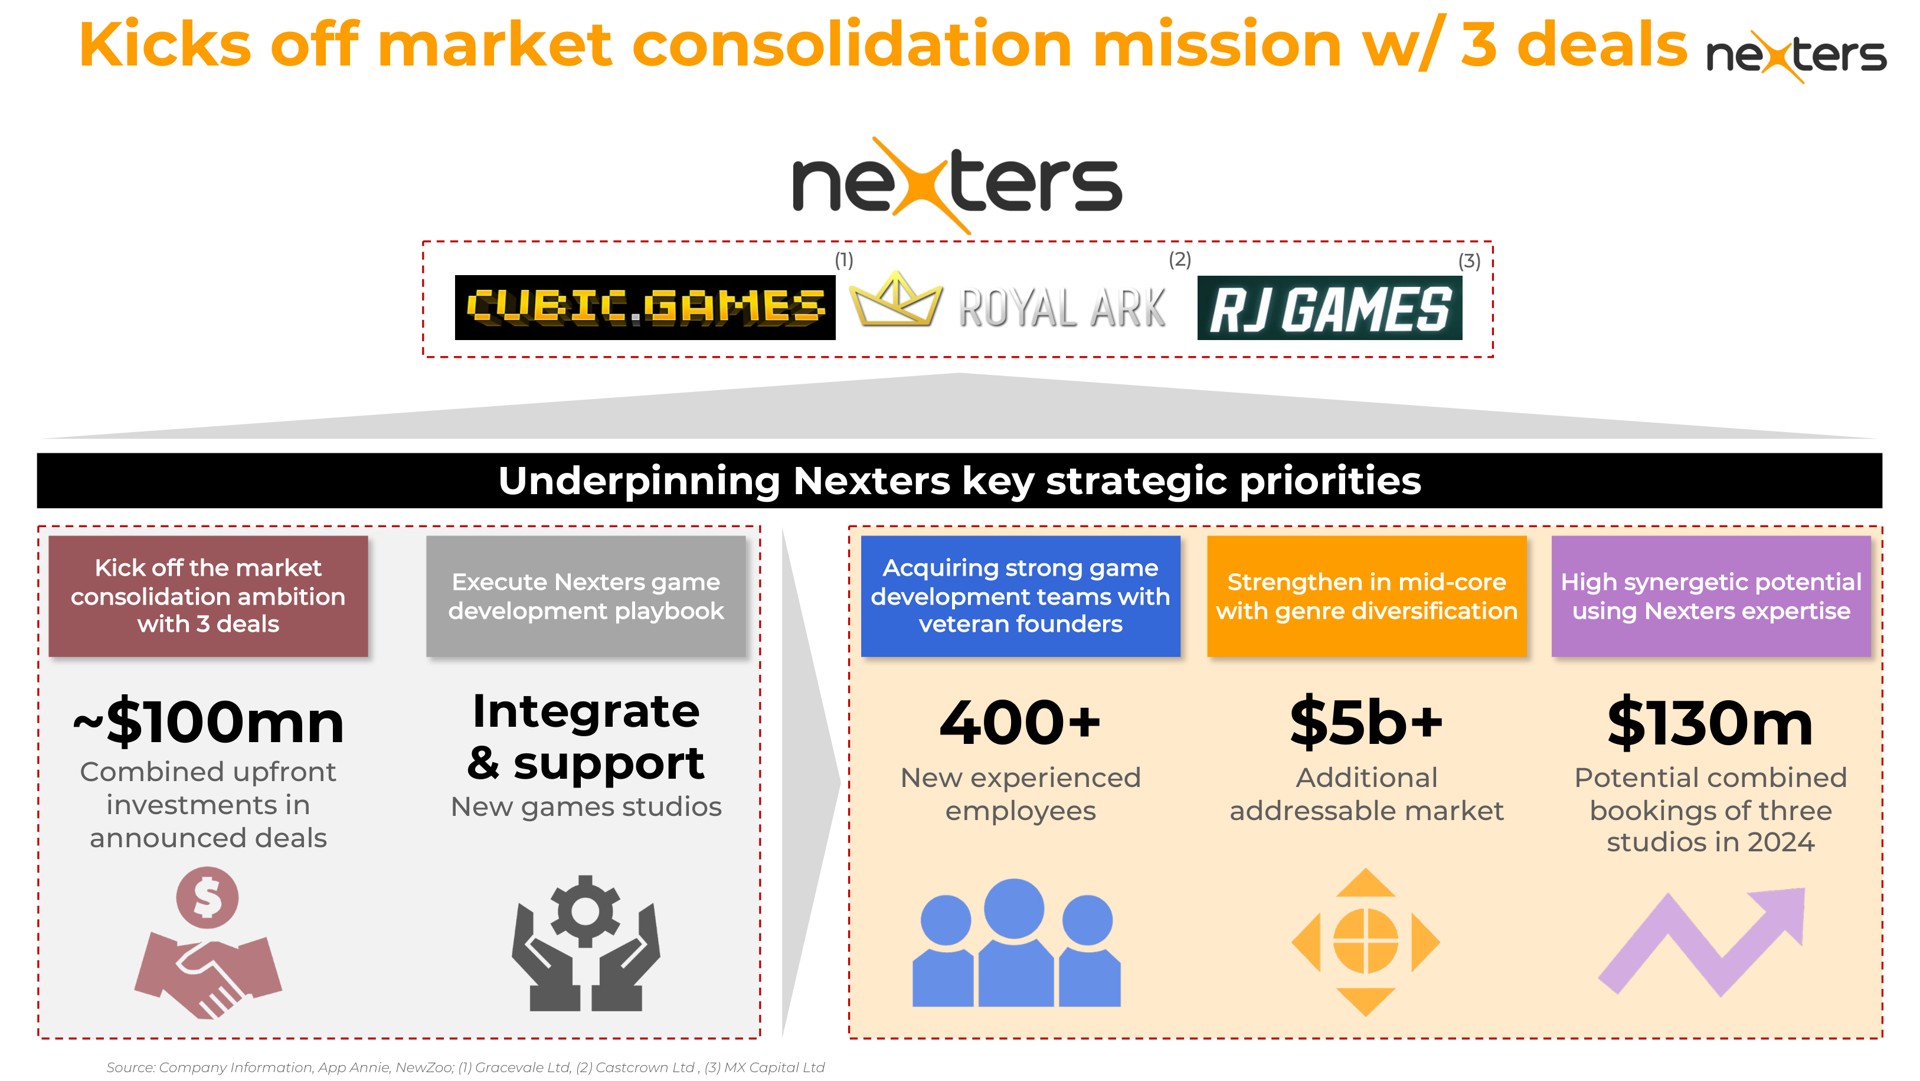 kicks off market consolidation mission deals underpinning key strategic priorities integrate support oval ark | Nexters